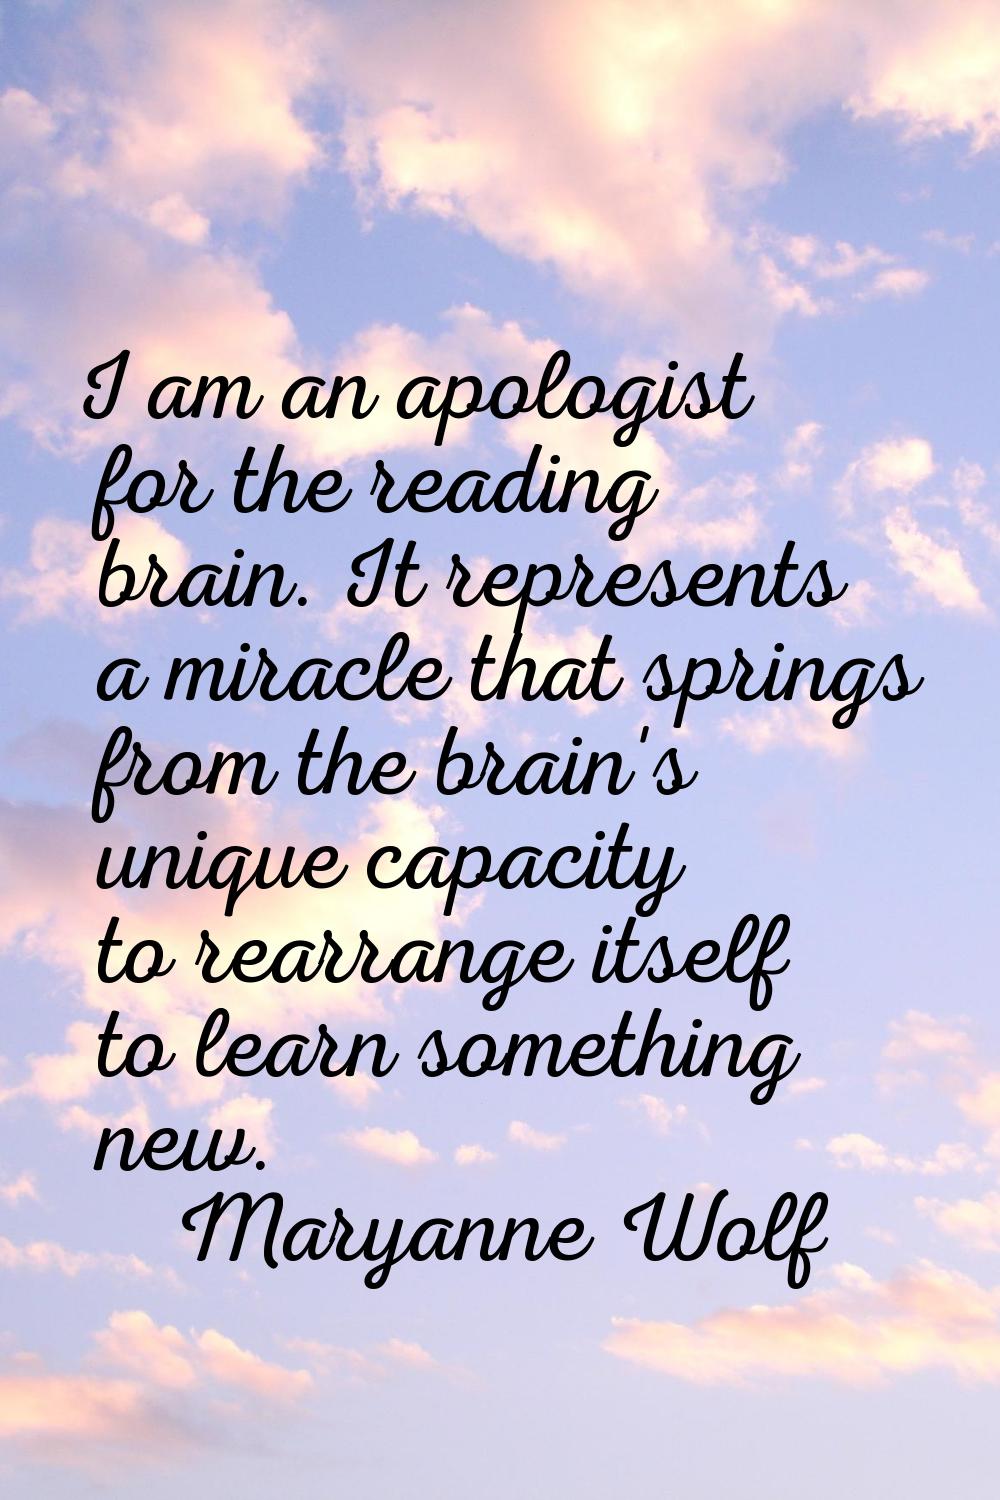 I am an apologist for the reading brain. It represents a miracle that springs from the brain's uniq